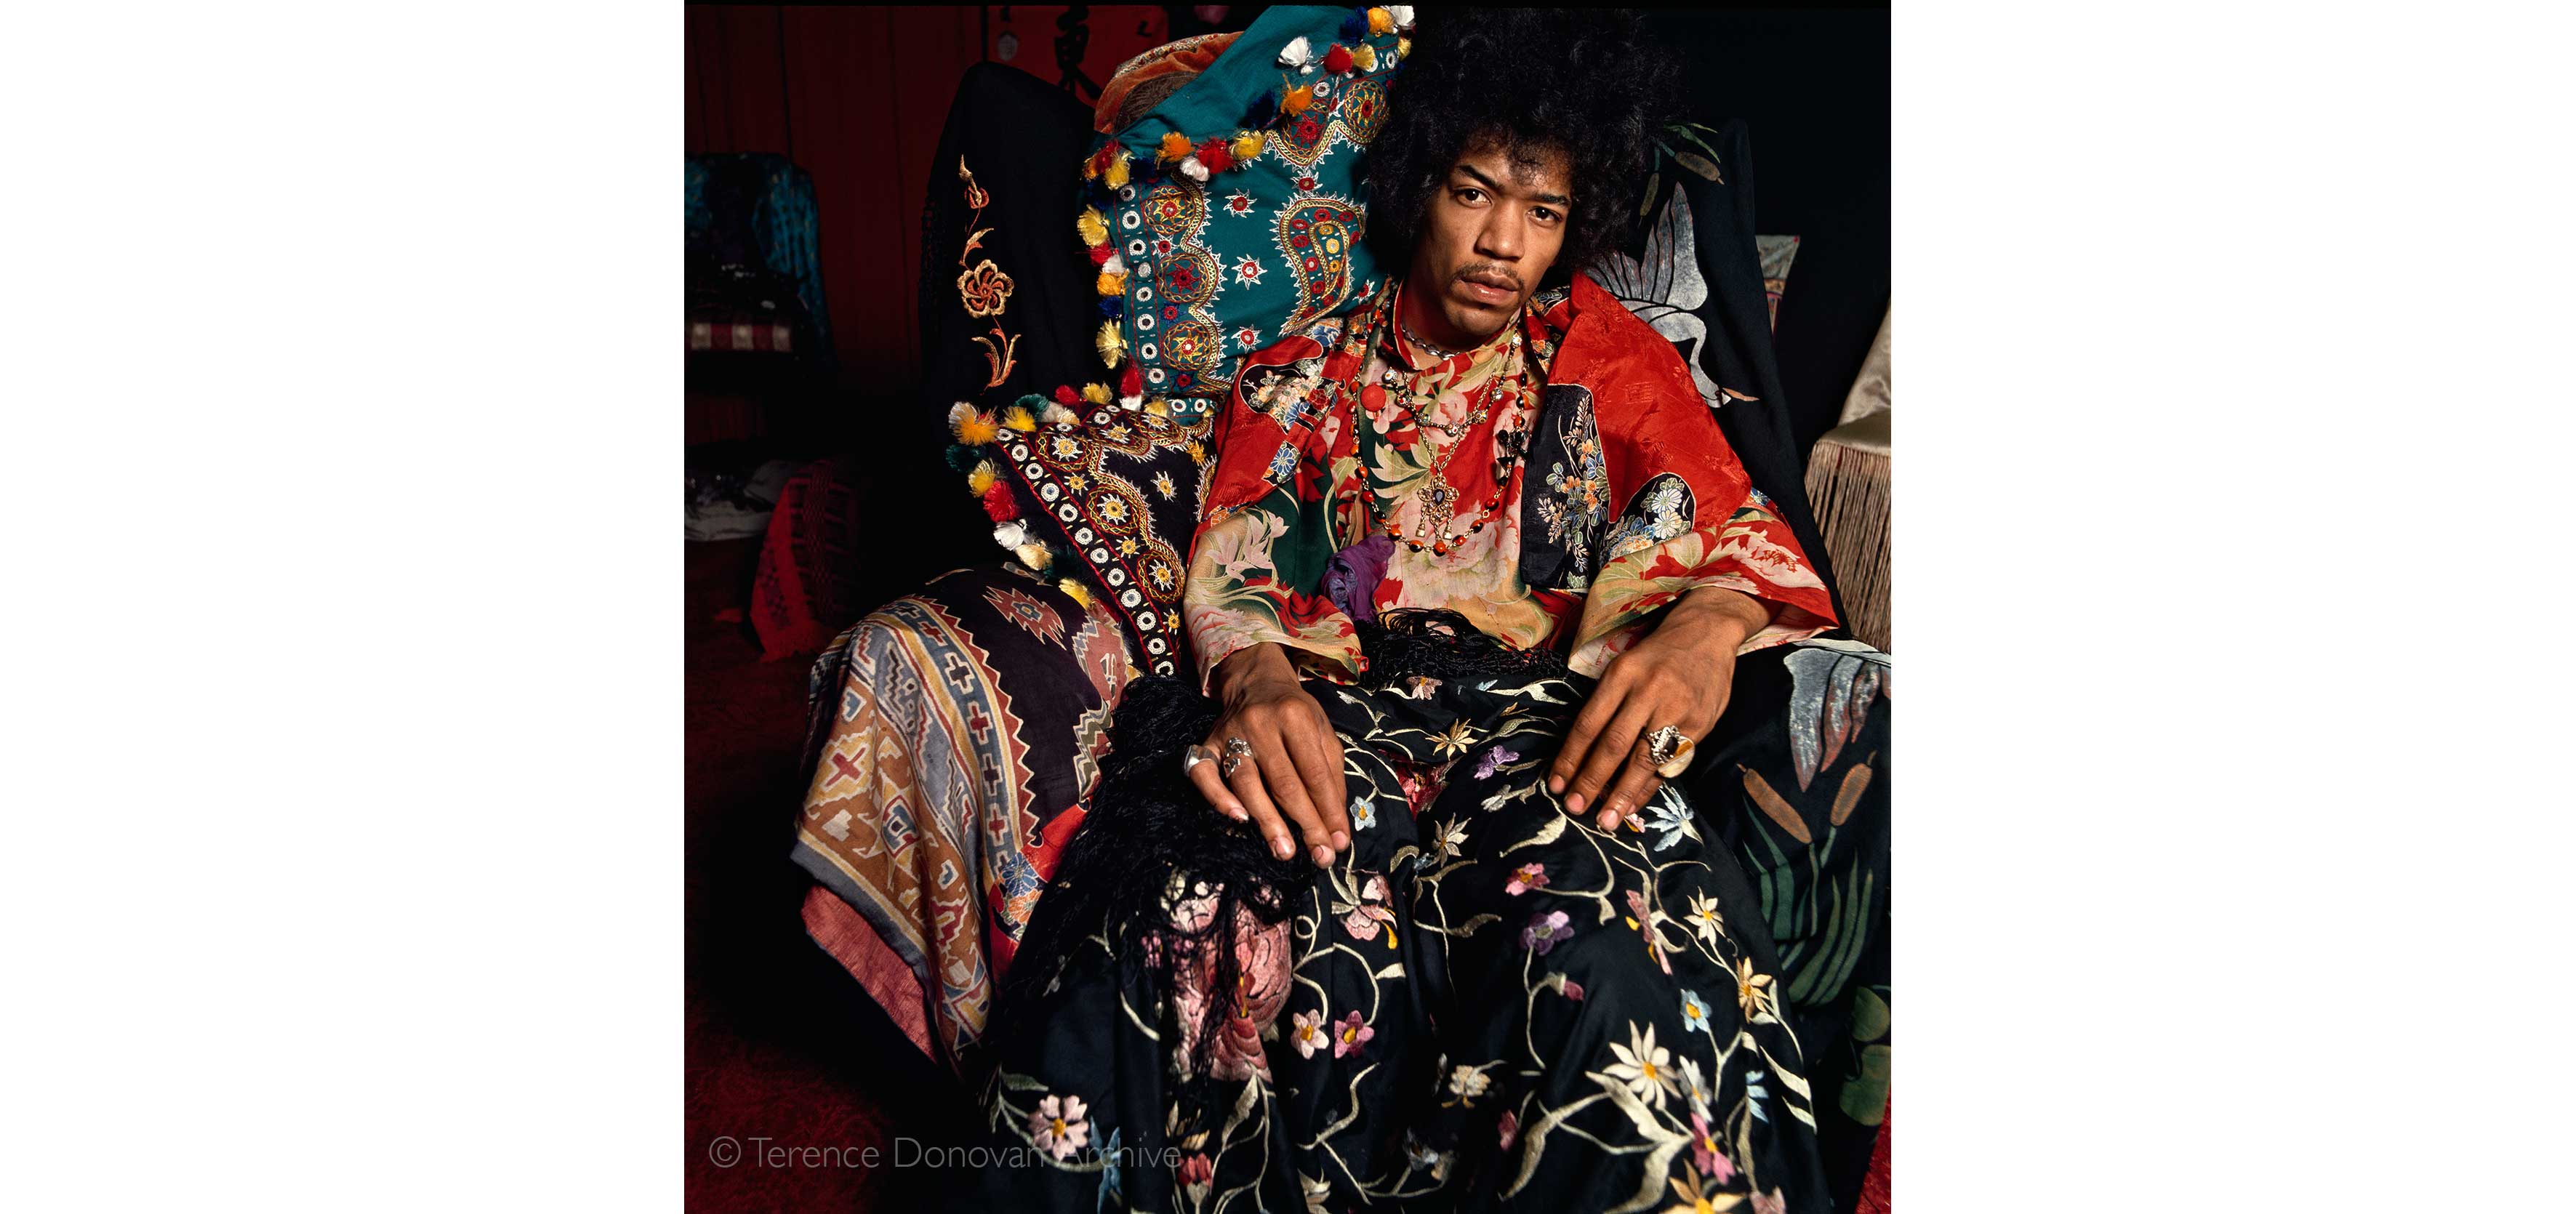 Jimi Hendrix photographed in his London flat for the Sunday Times, August 1967